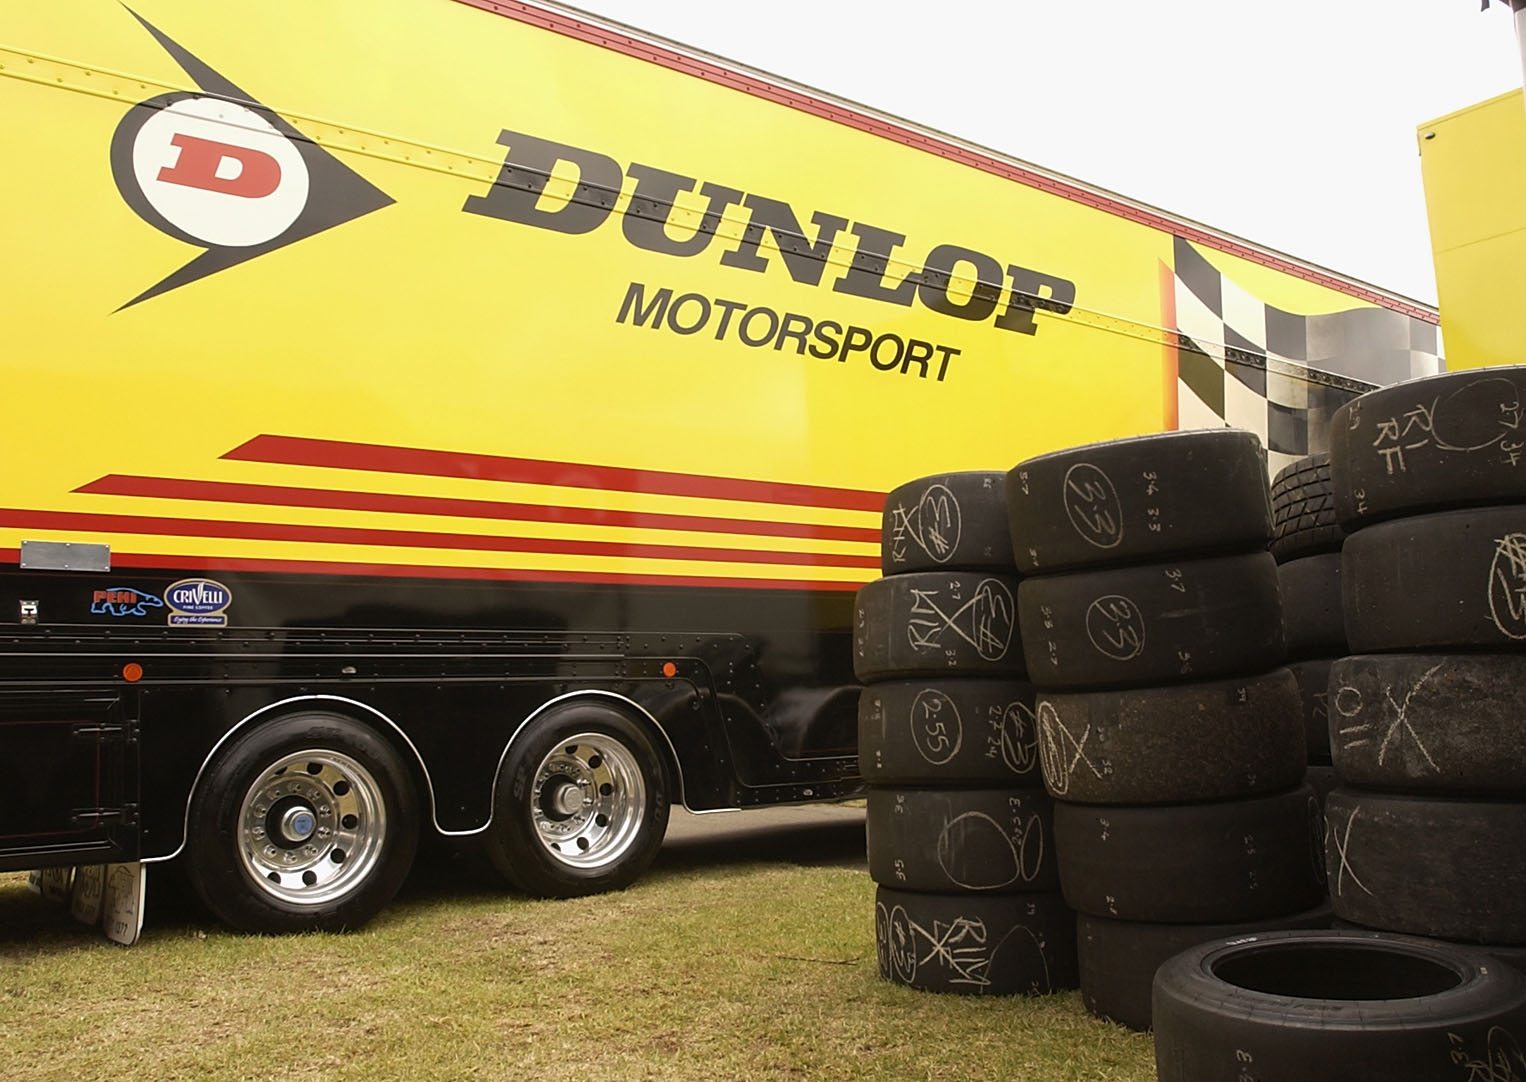 Dunlop tyres are prepared for the Clipsal 500